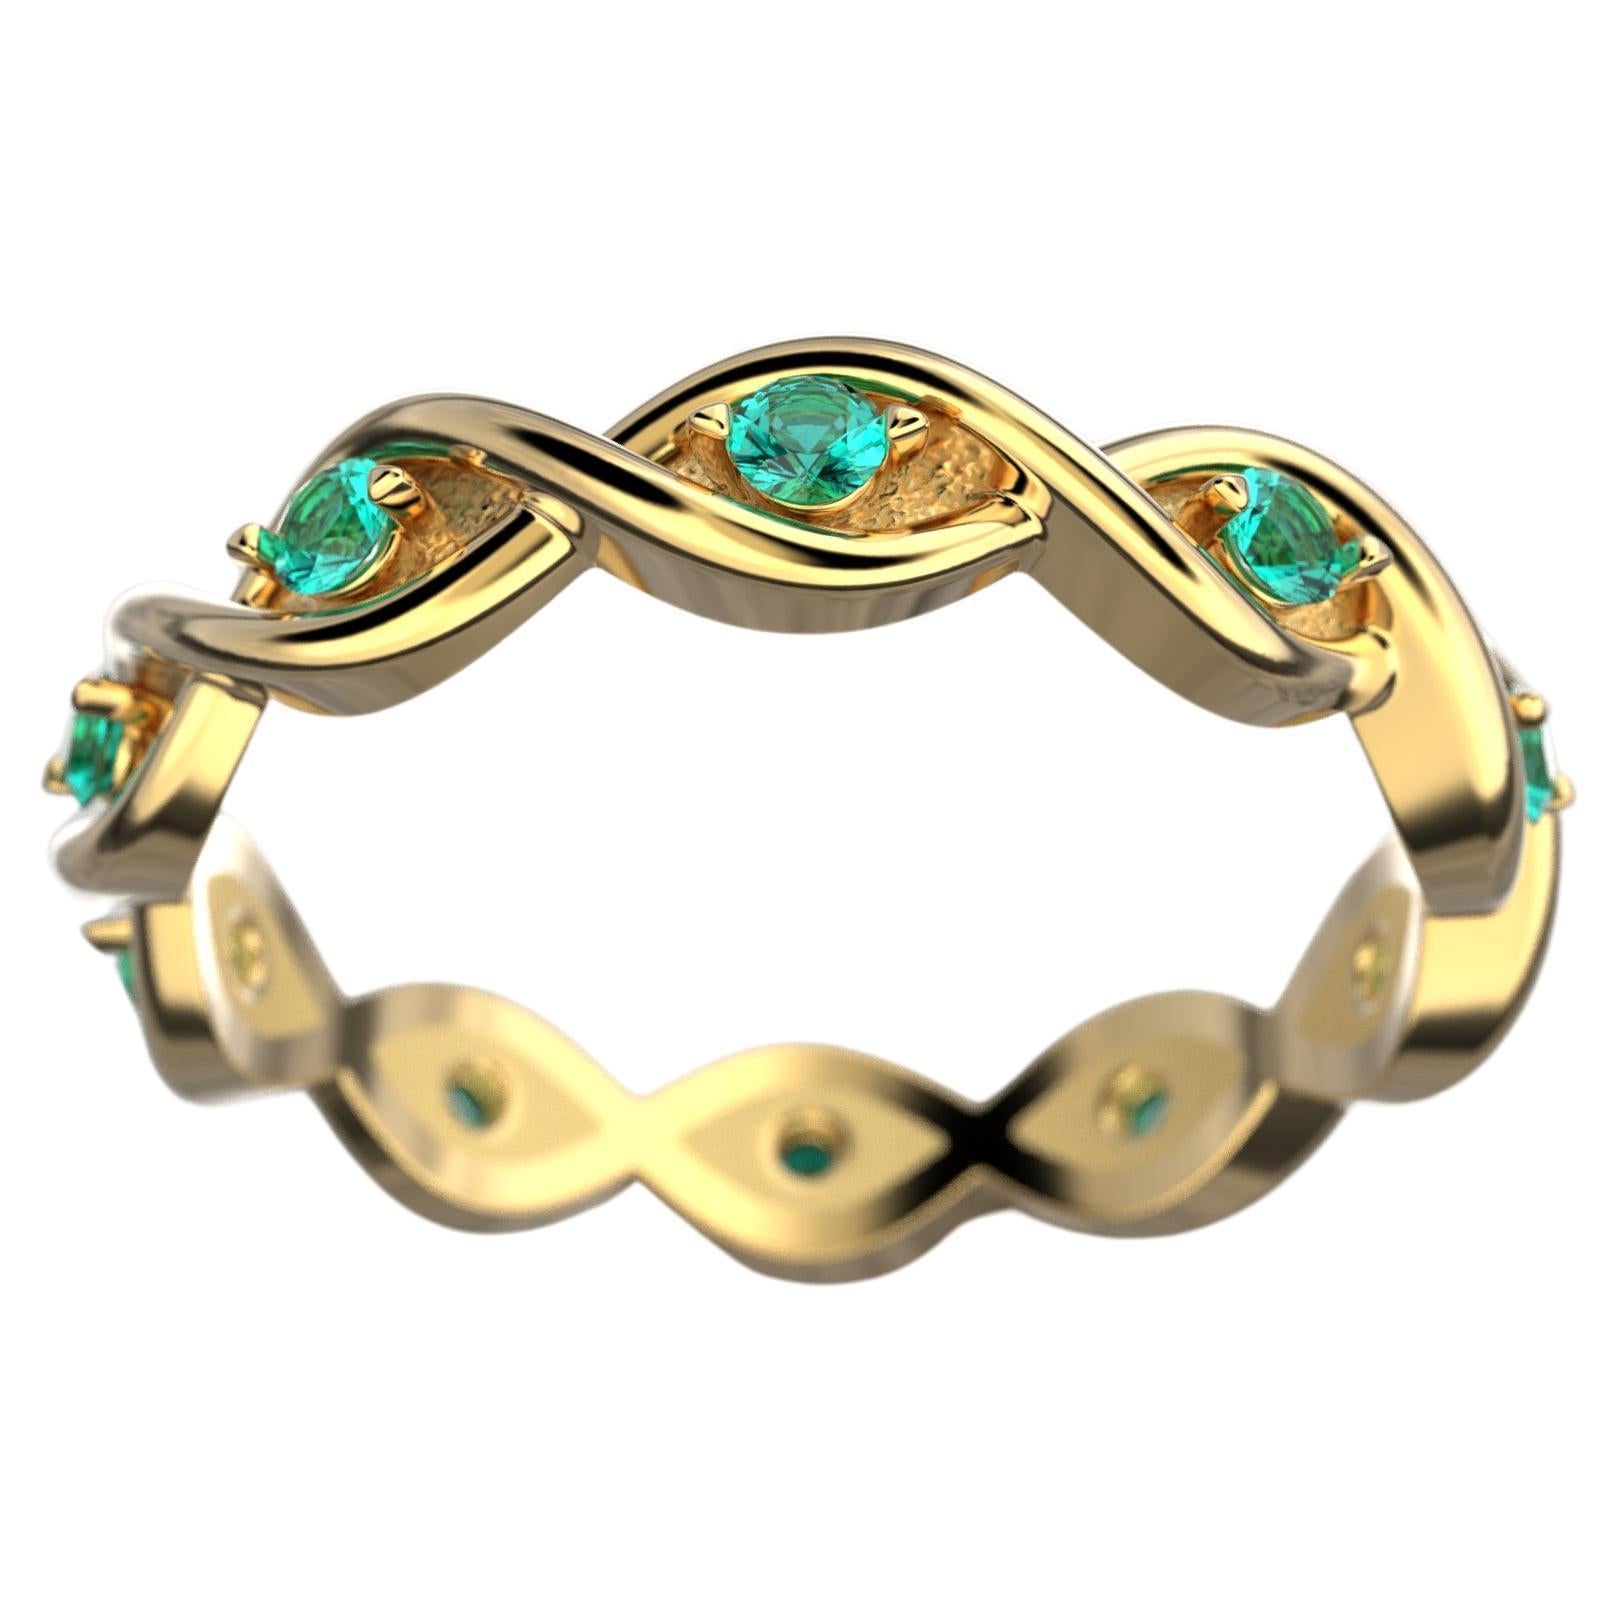 For Sale:  Oltremare Gioielli Emerald Gold Eternity Band in 14k, Made in Italy